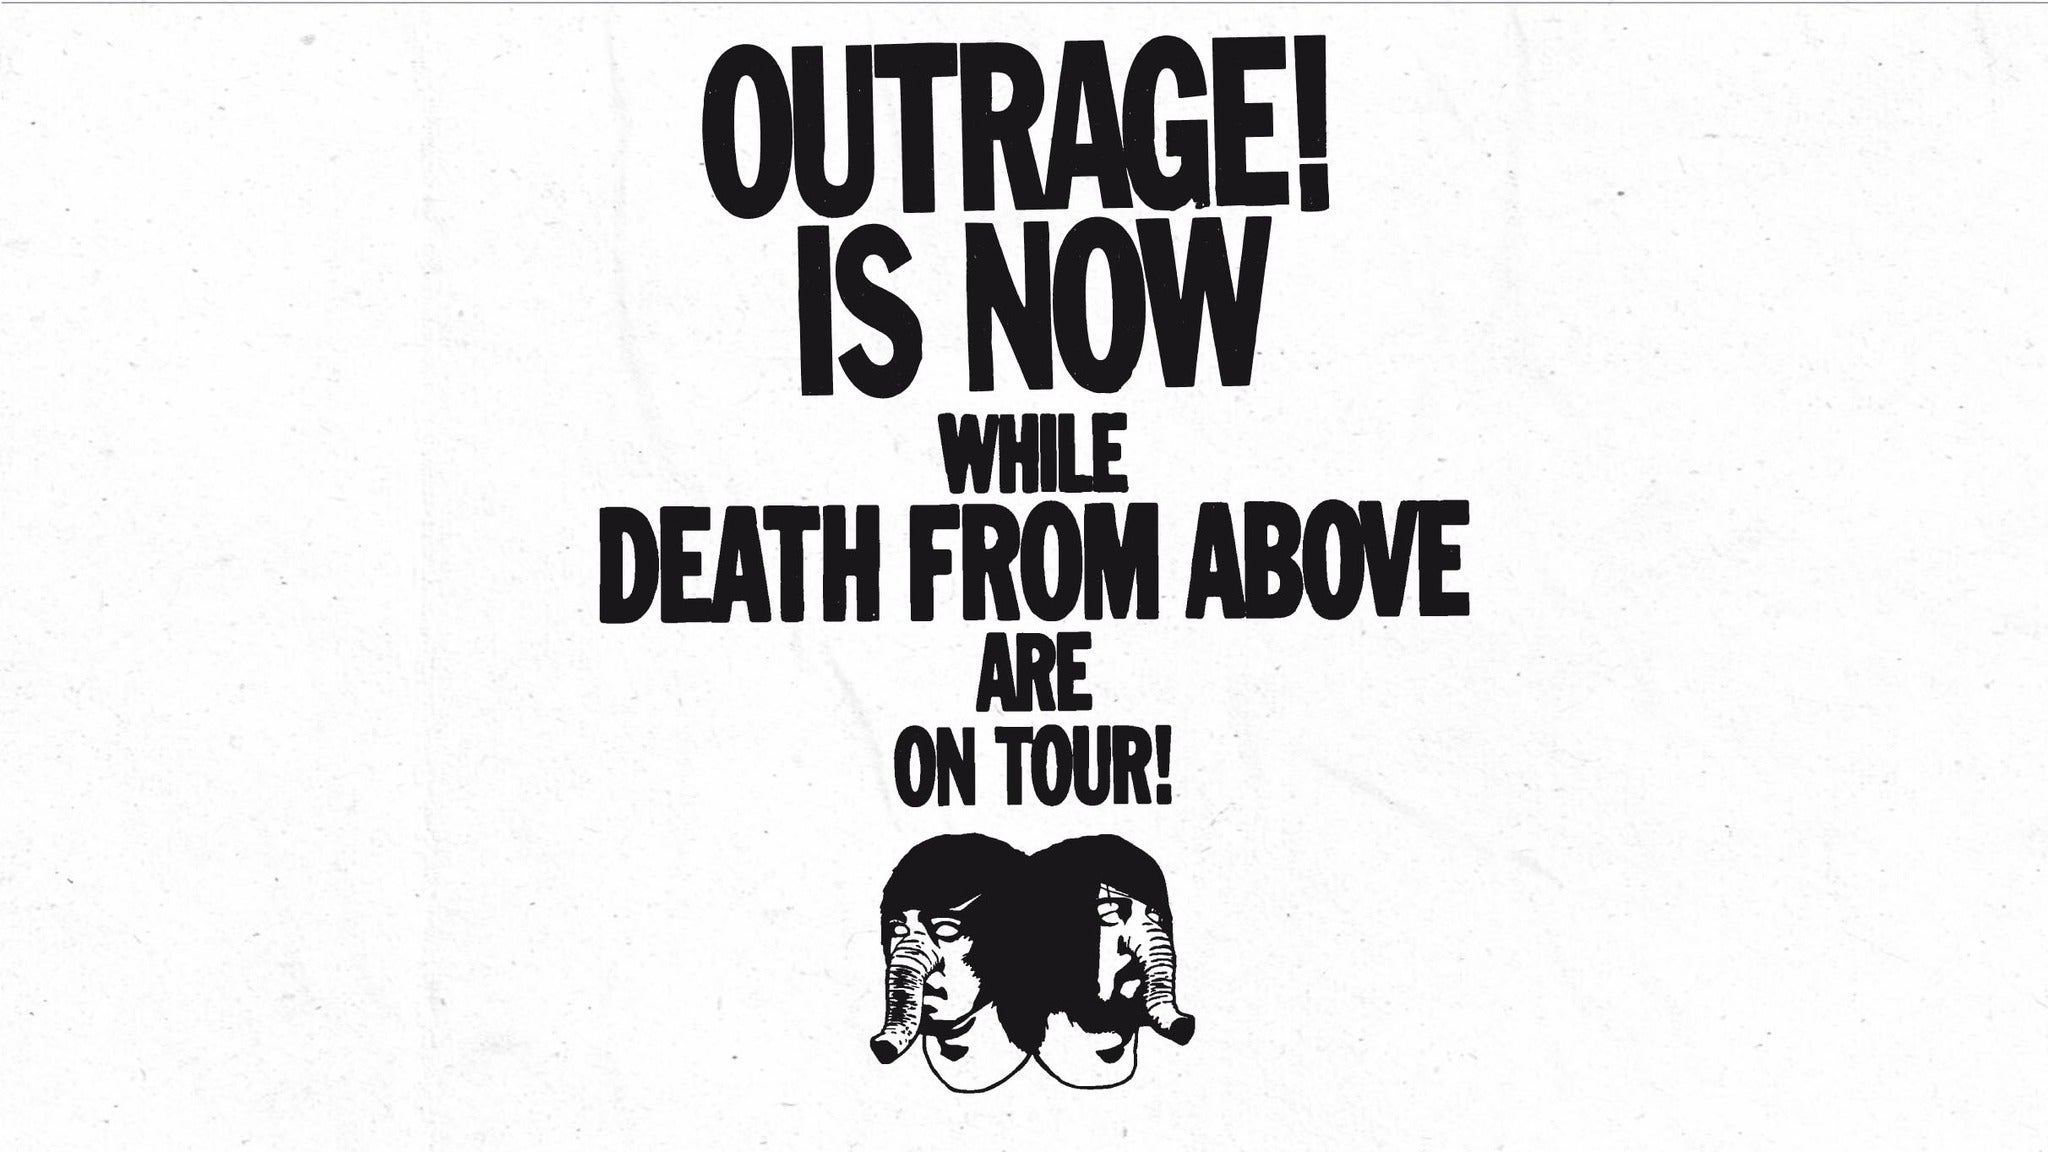 Image used with permission from Ticketmaster | Death From Above 1979 tickets